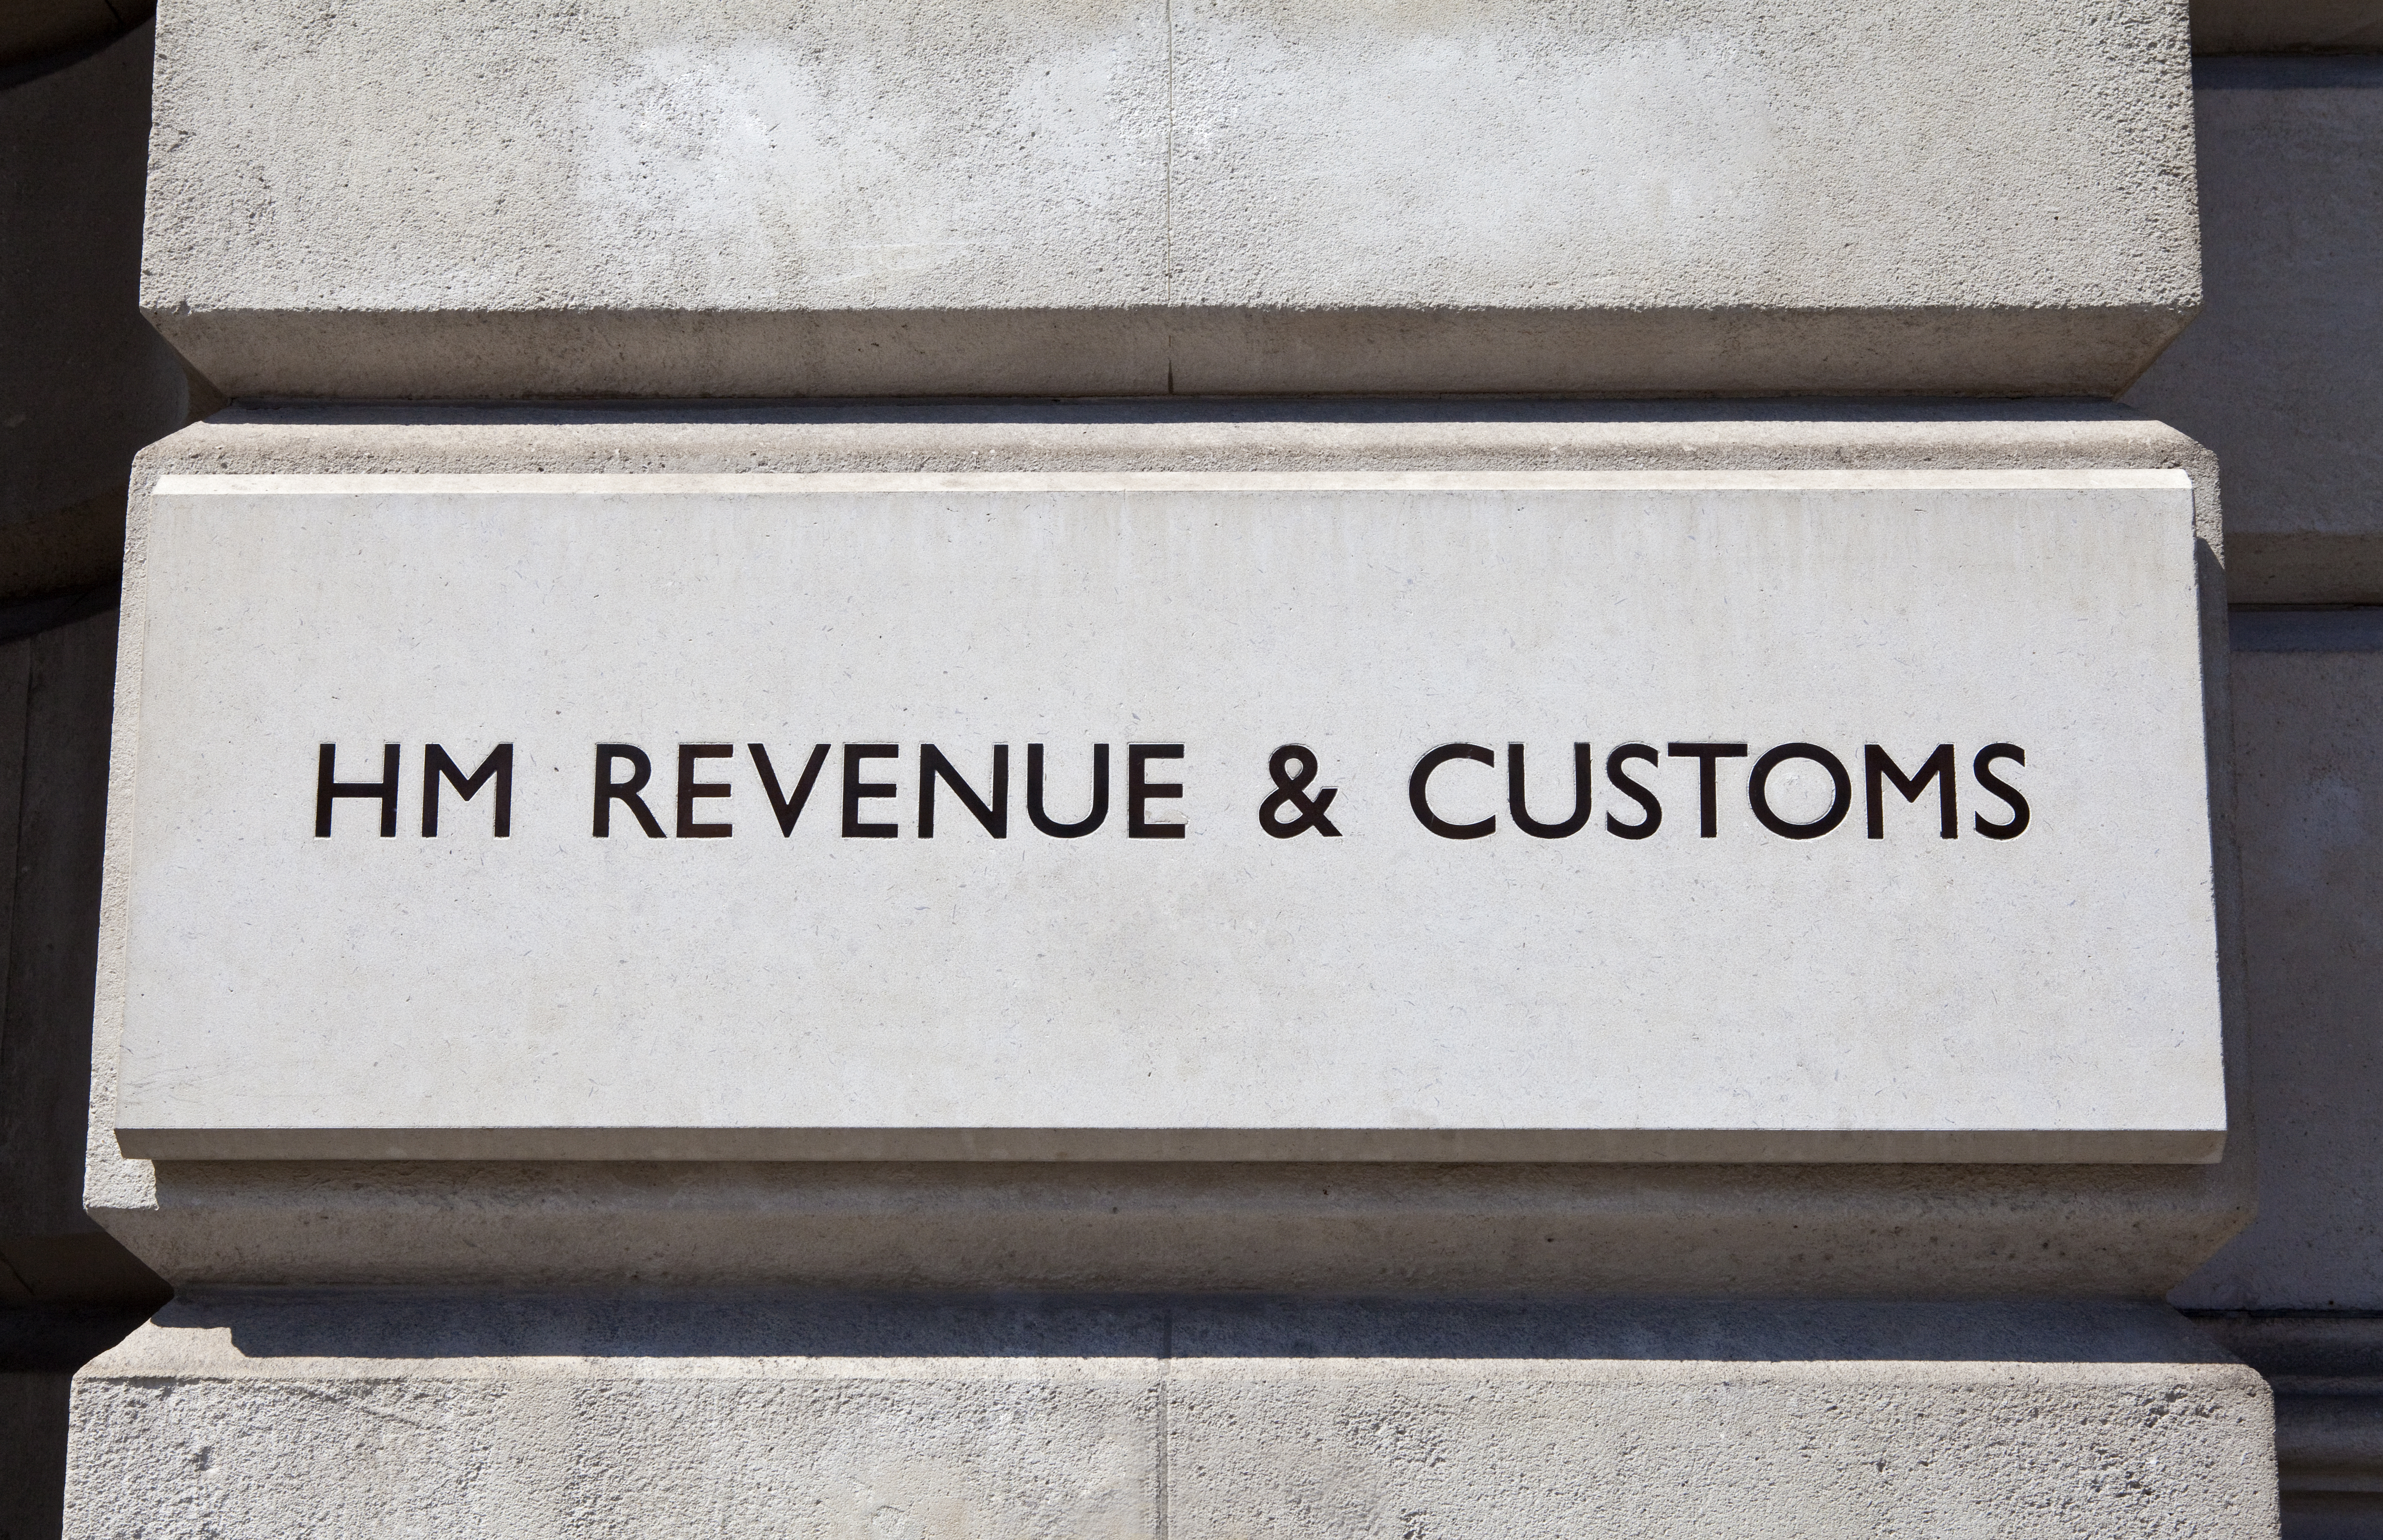 HMRC: Resi transactions up 4.2% year-on-year